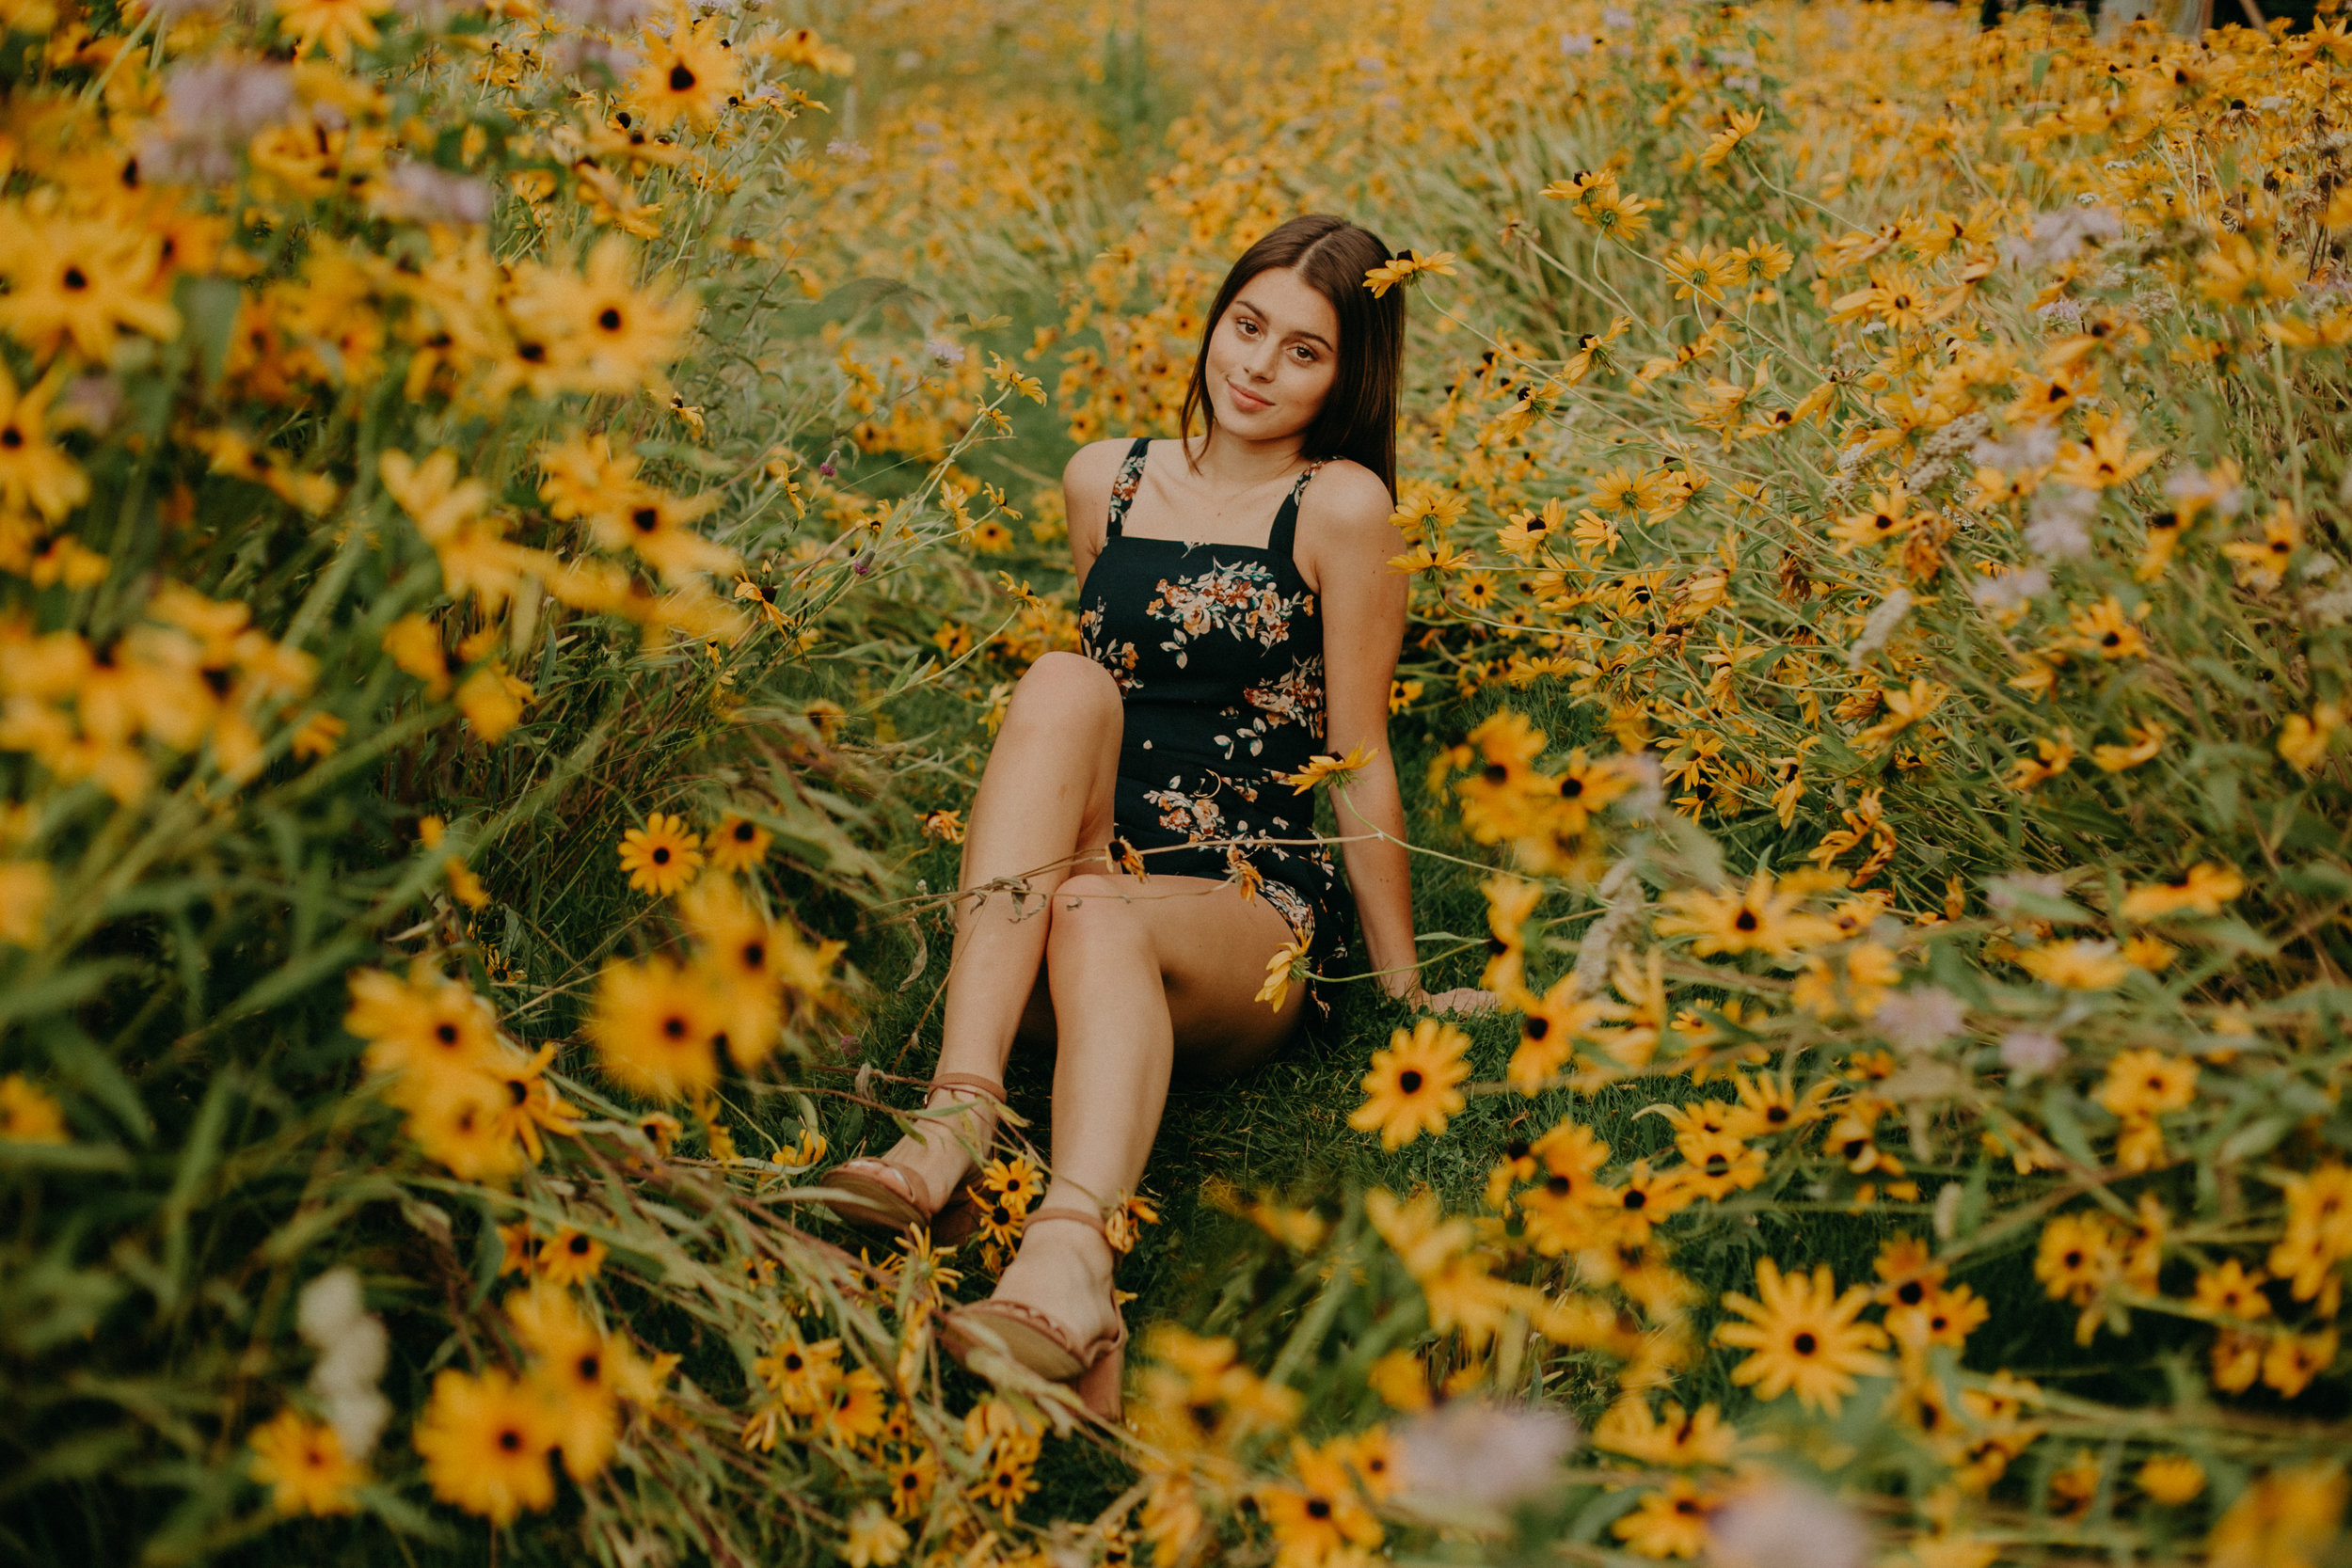  Andrea Wagner Photography captures epic moments in a bright yellow daisy field in Stillwater MN during senior photo shoot 